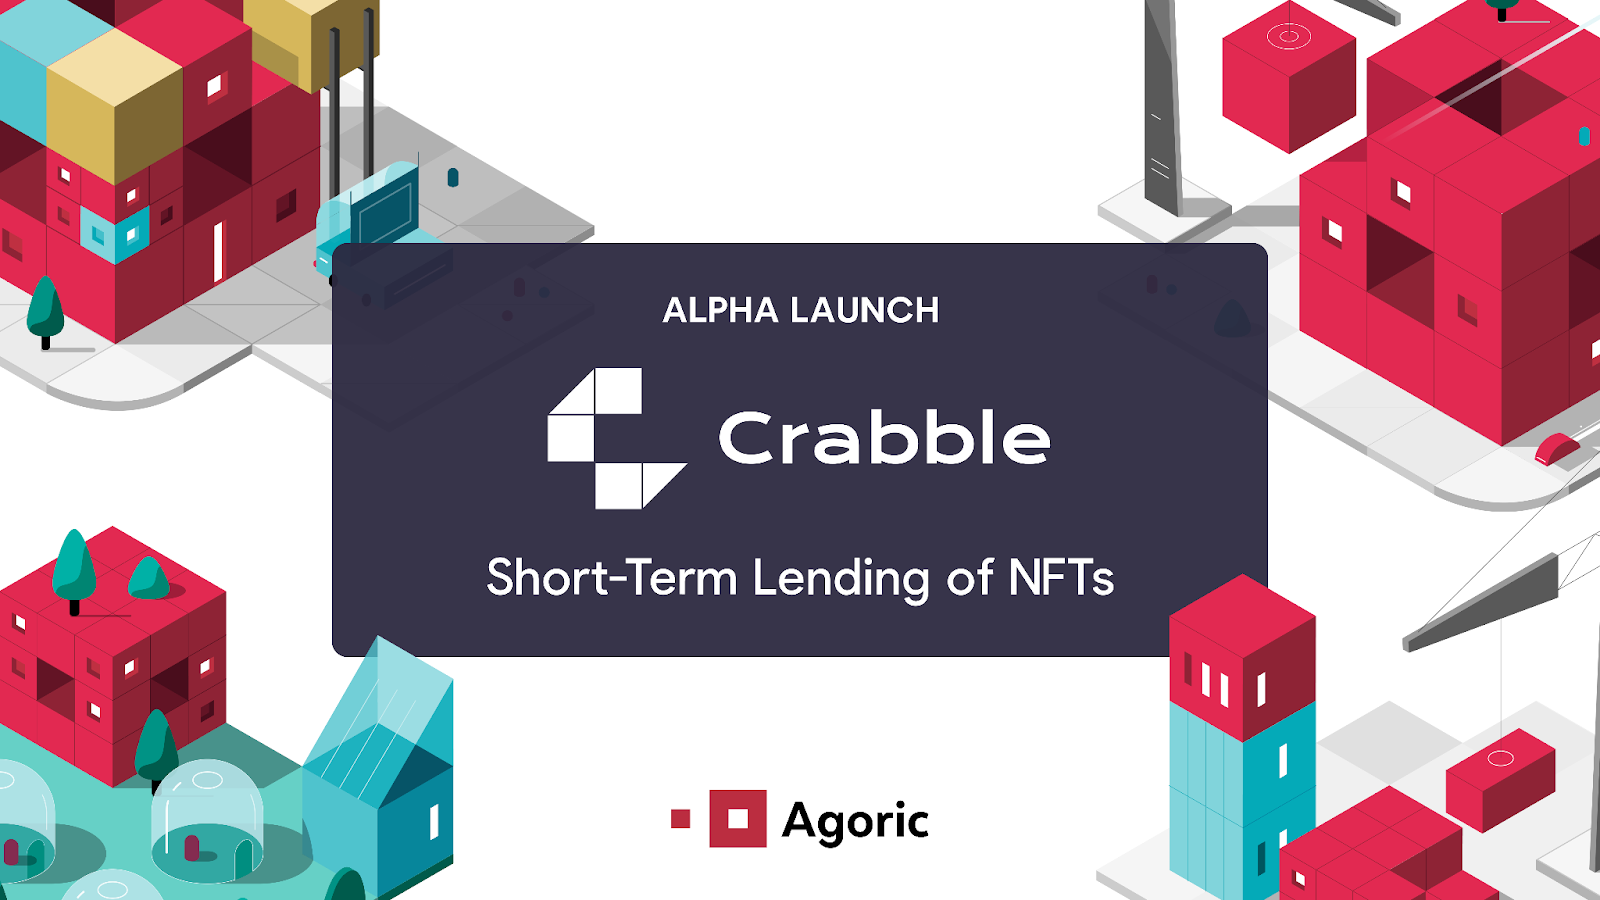 Crabble Application is Bringing NFT Lending to Agoric Mainnet